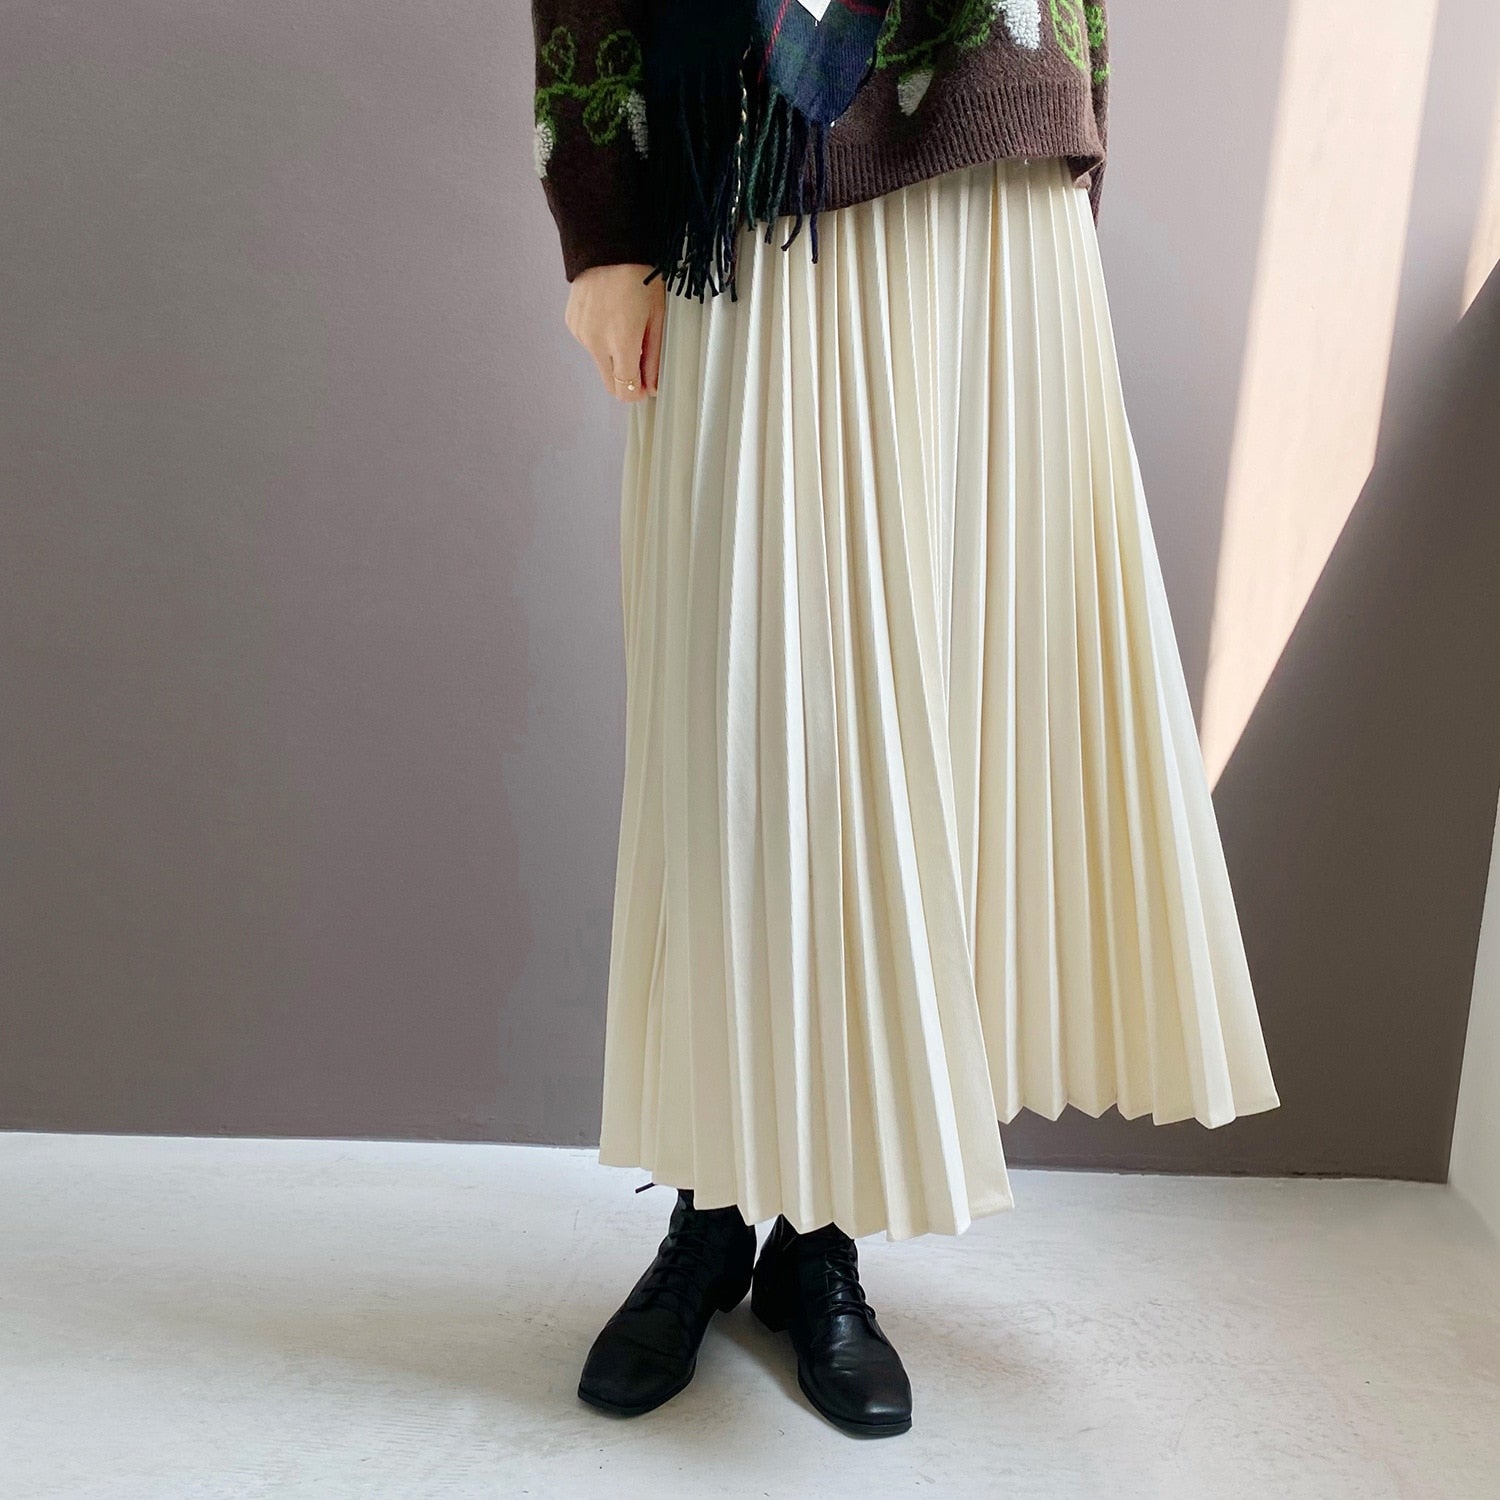 High Waist Pure Color pleated Skirt - SixtyKey new model design Dubai fashion style 2021 best price